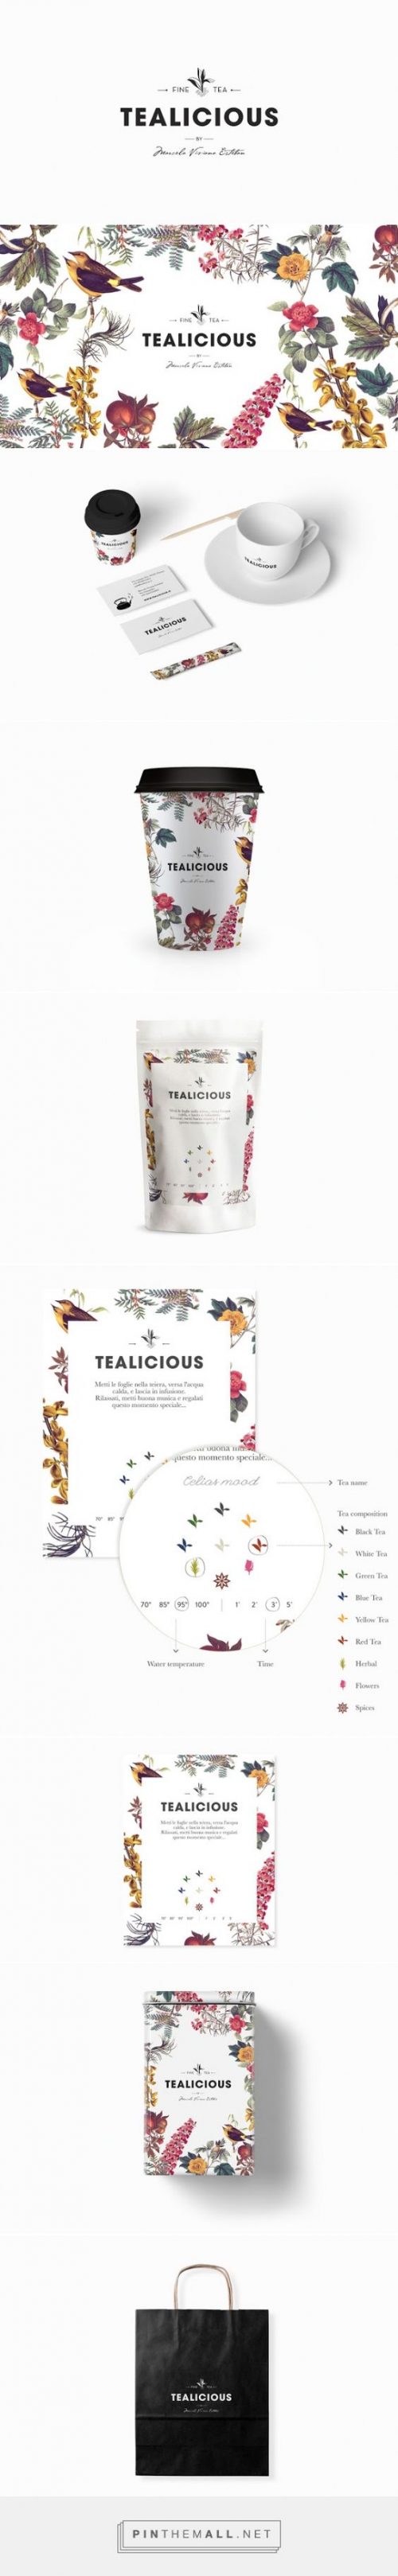 Tealicious Packaging Design and Branding